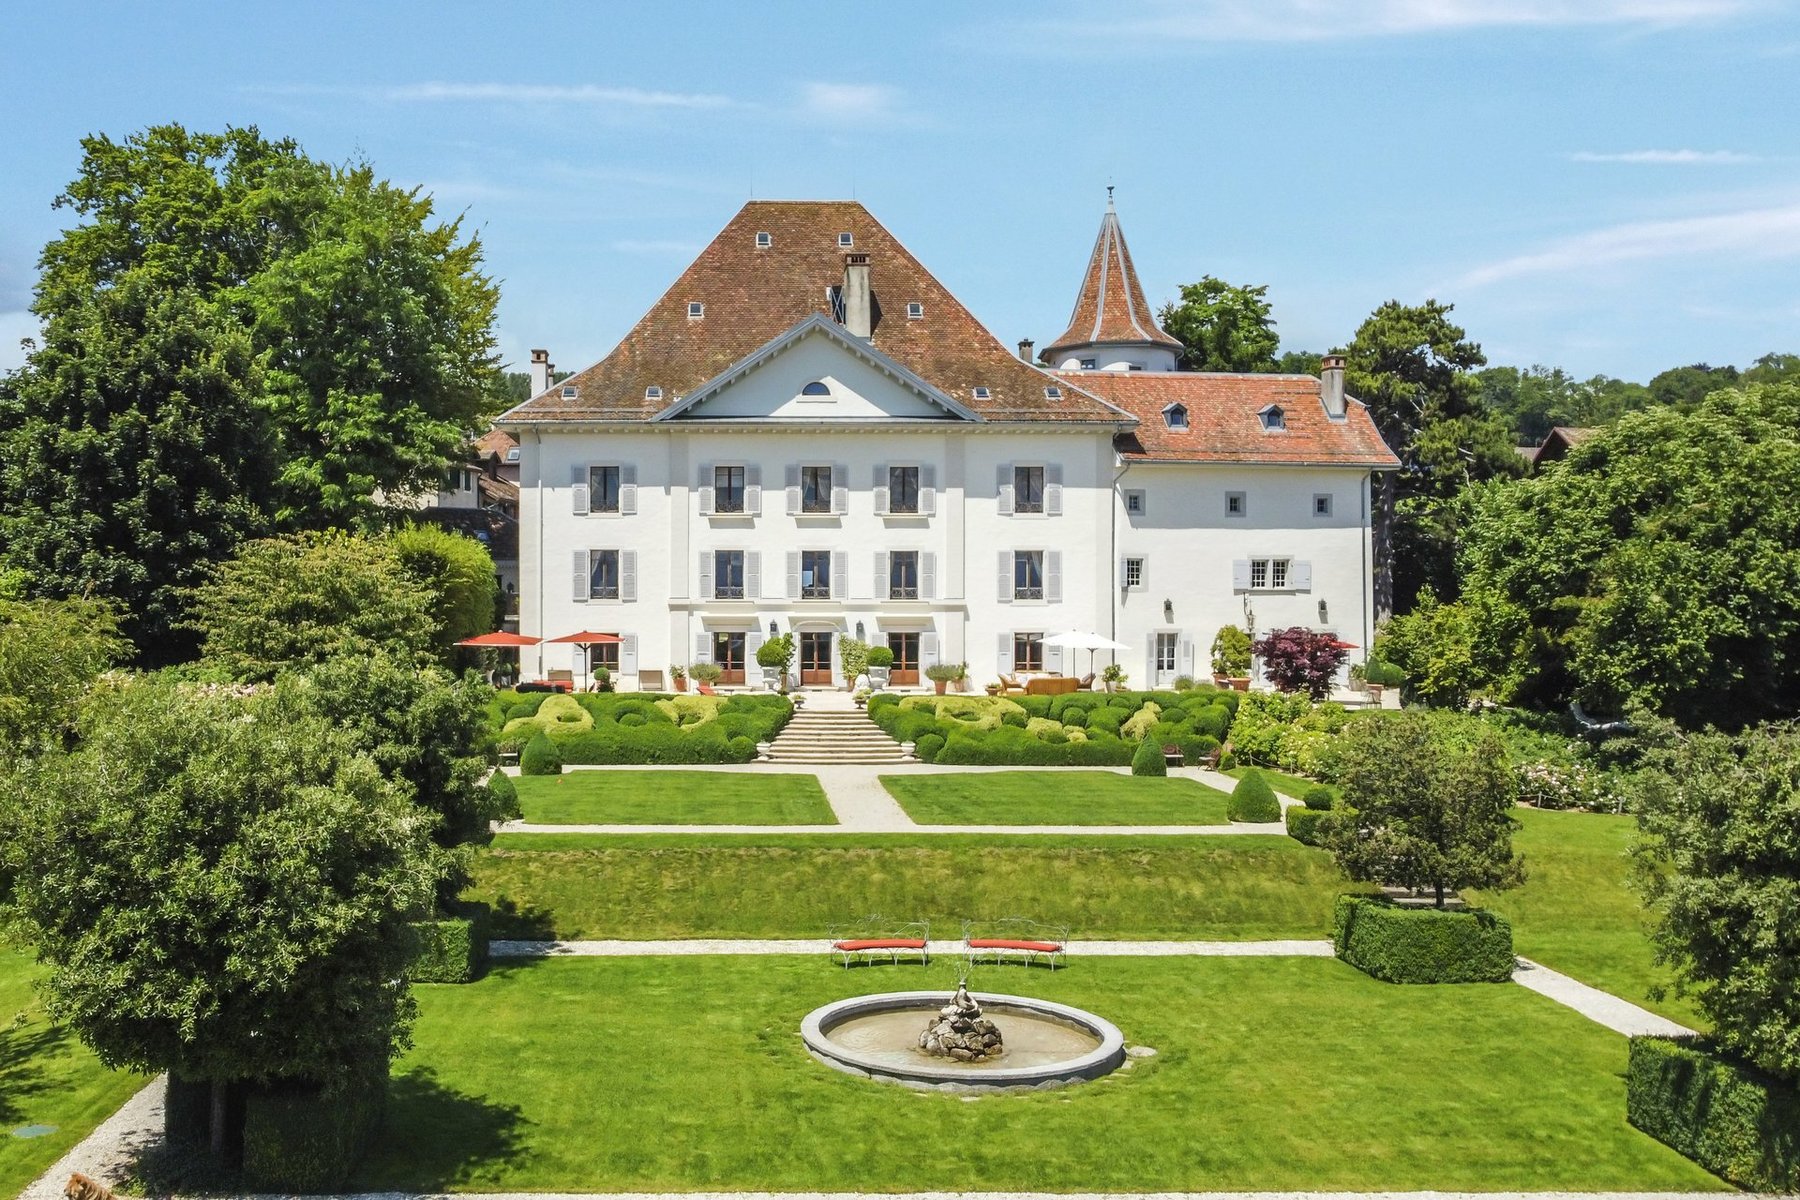 Majestic castle with panoramic views on the lake, near Nyon